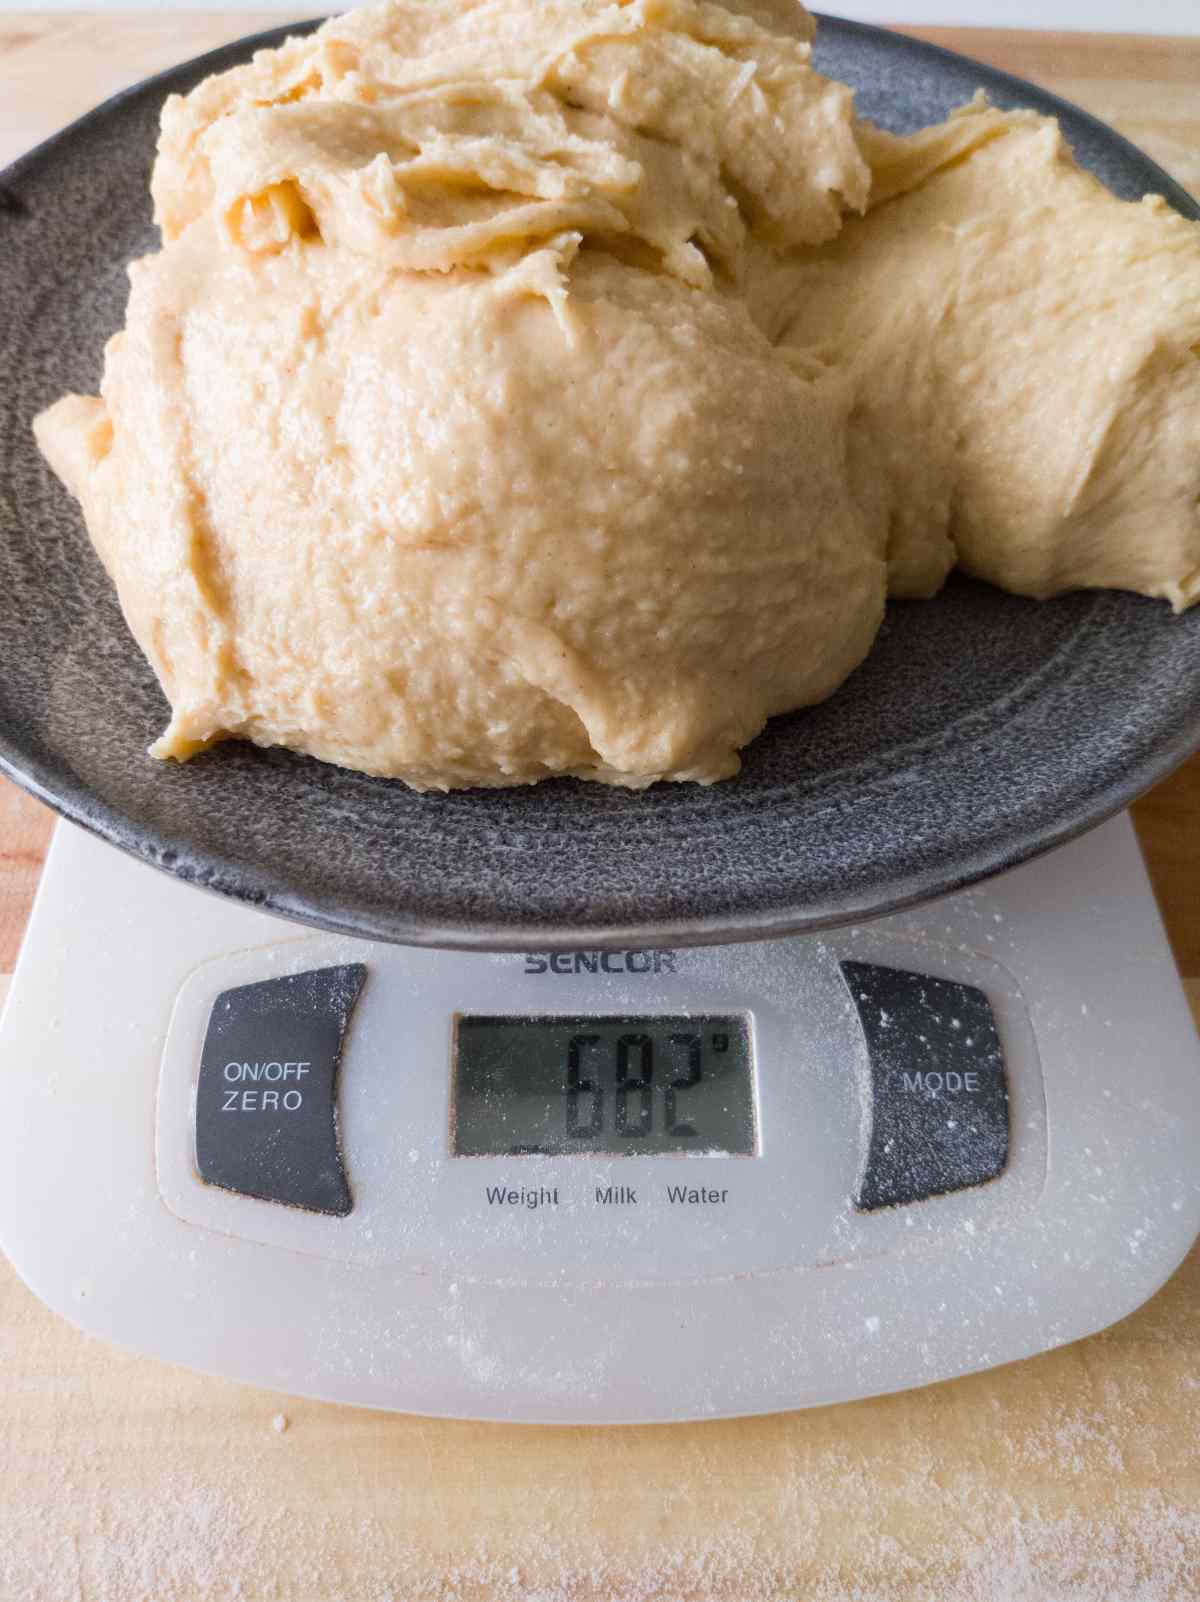 Weighing the dough on a digital scale.